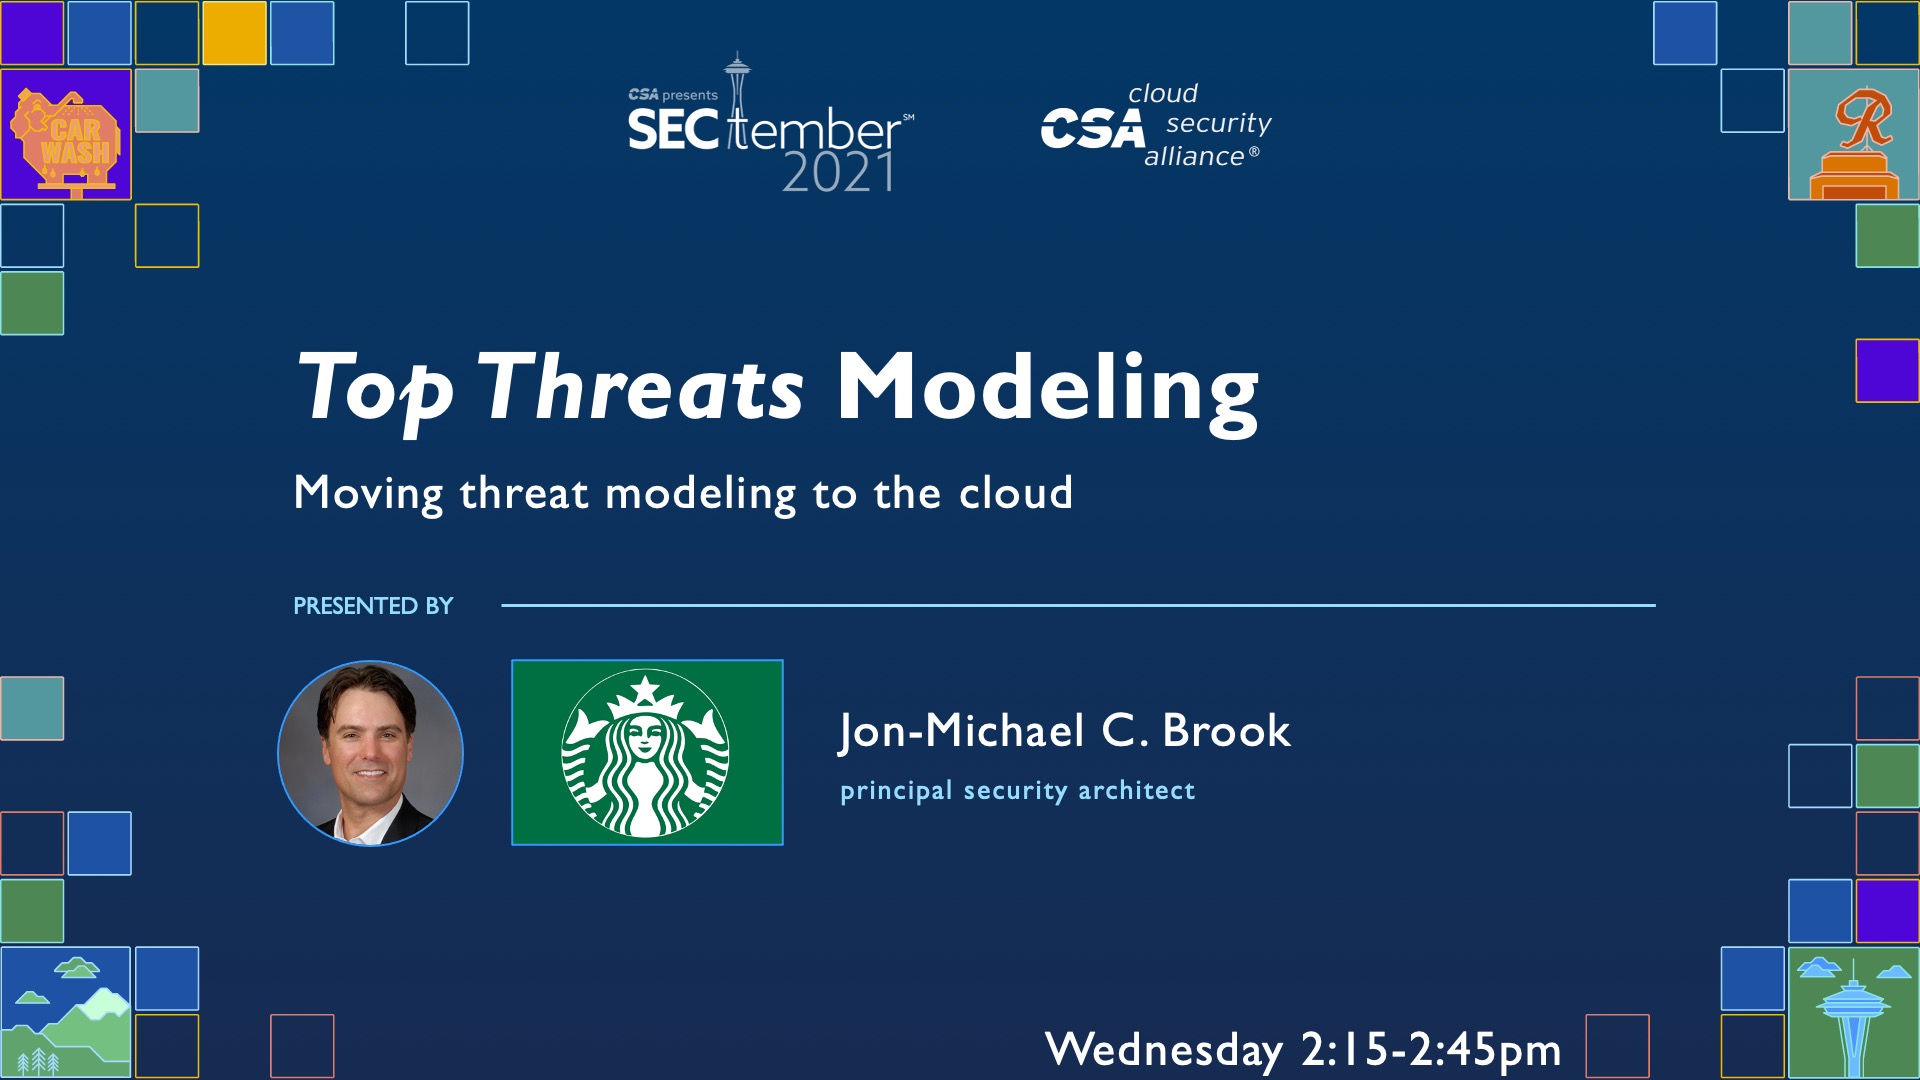 Threat Modeling in Today's Cloud - Ransomware, Supply Chain, and more